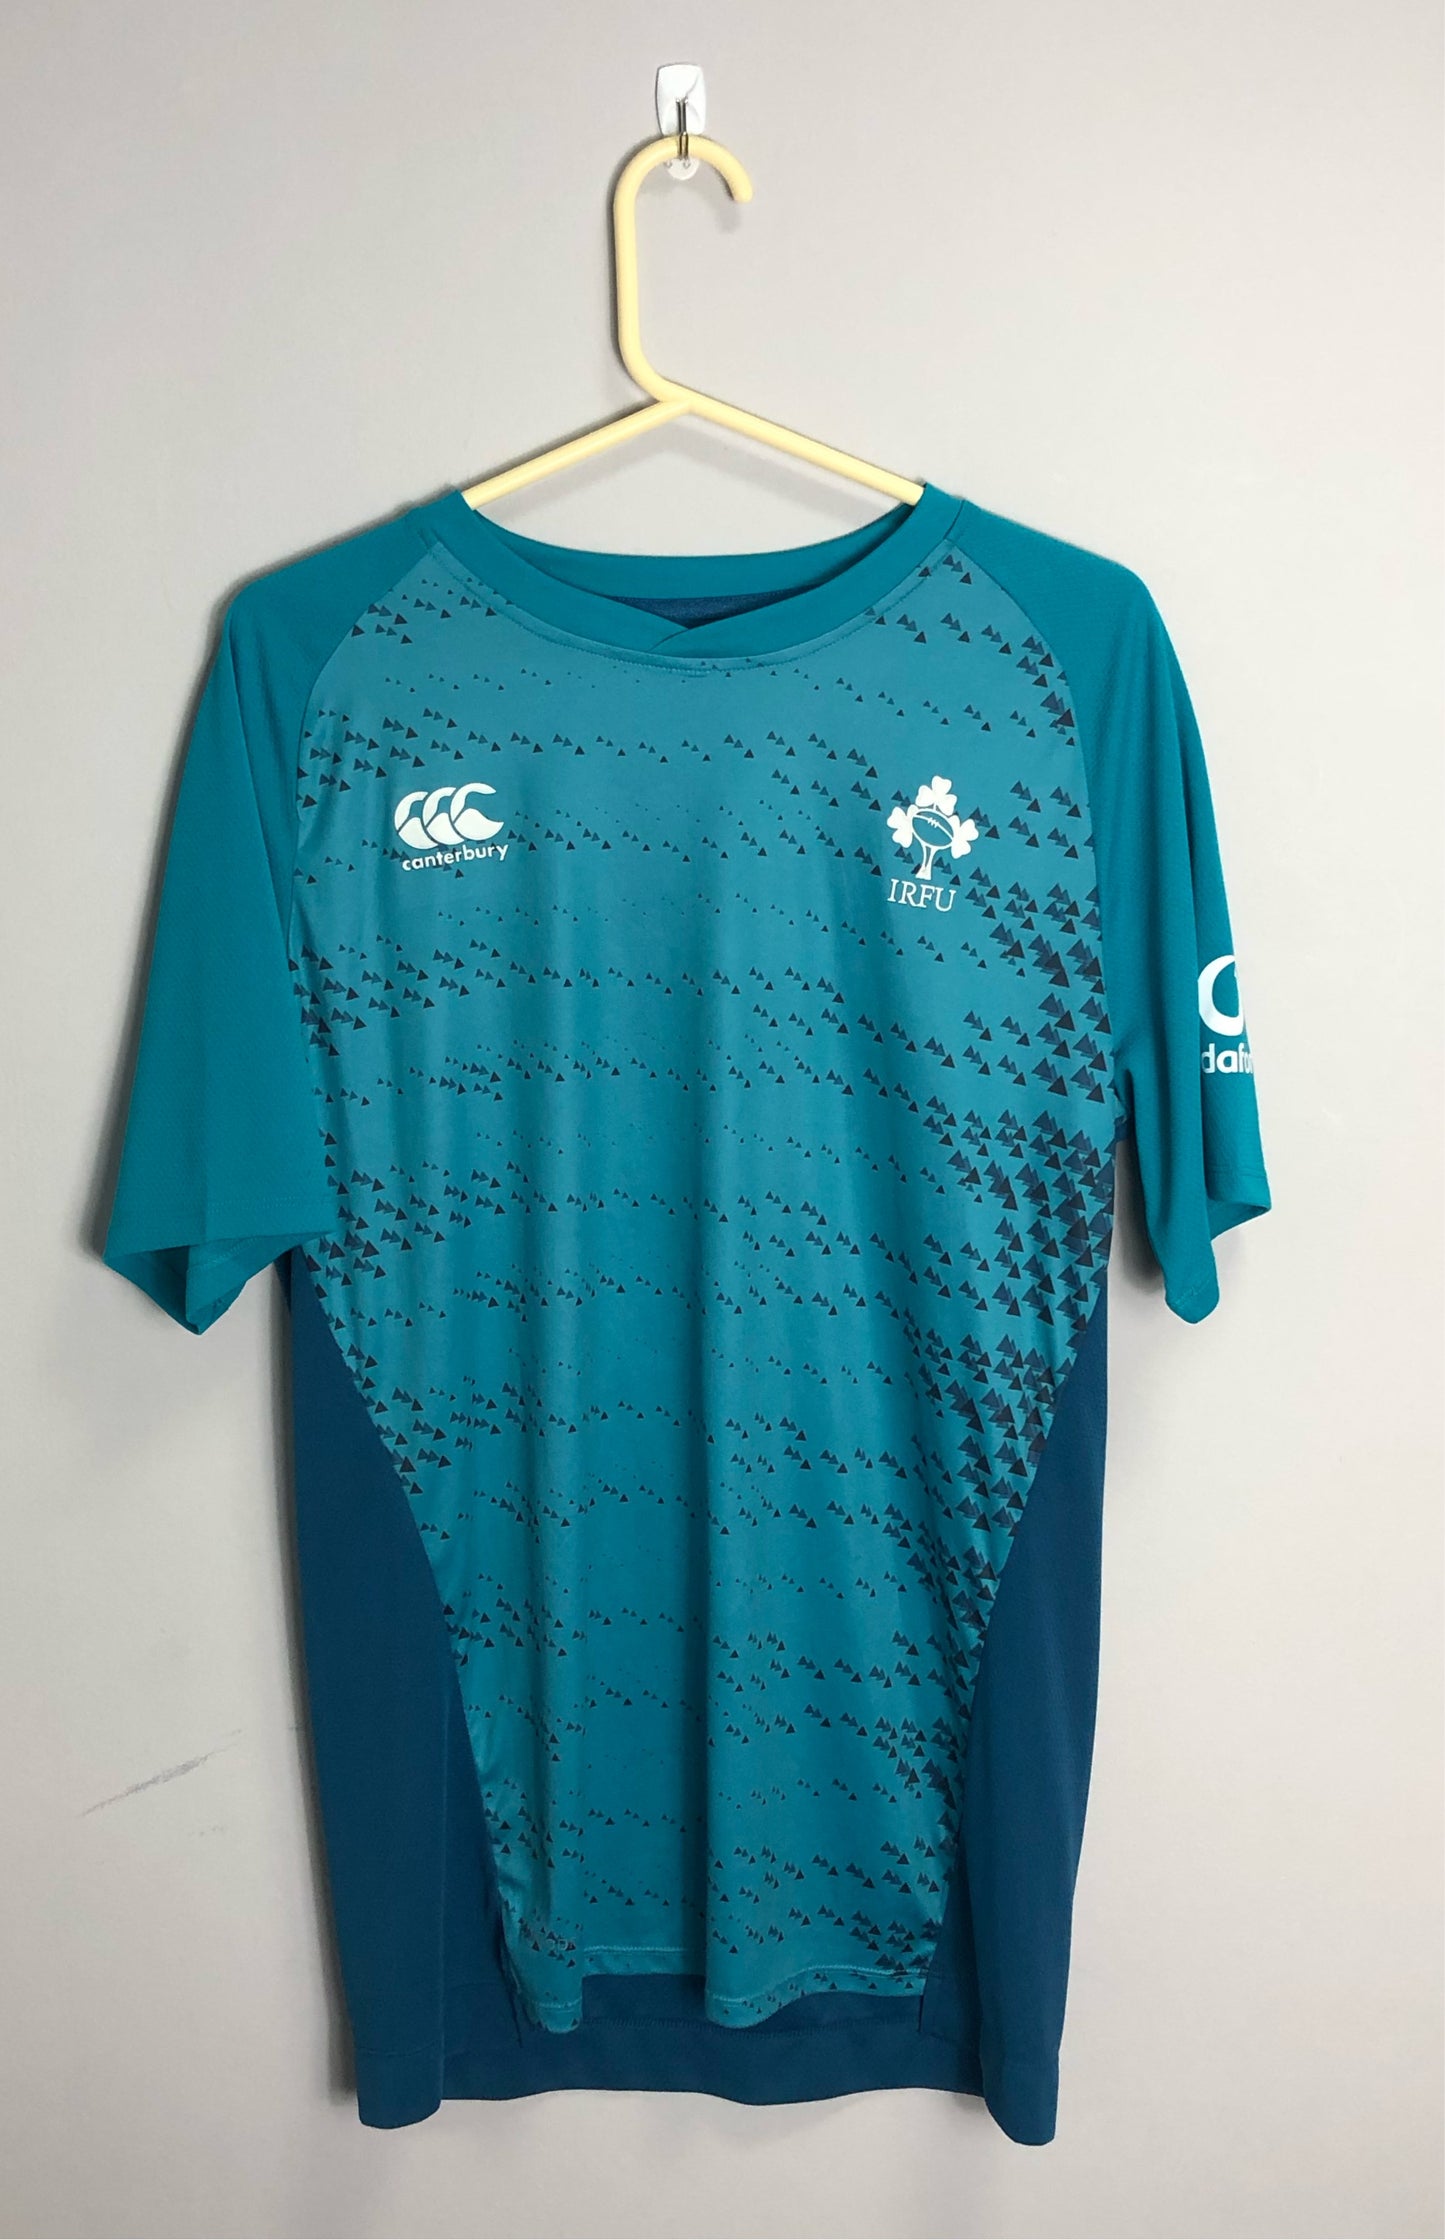 Ireland Rugby Tee Shirt - Large - 42” Chest